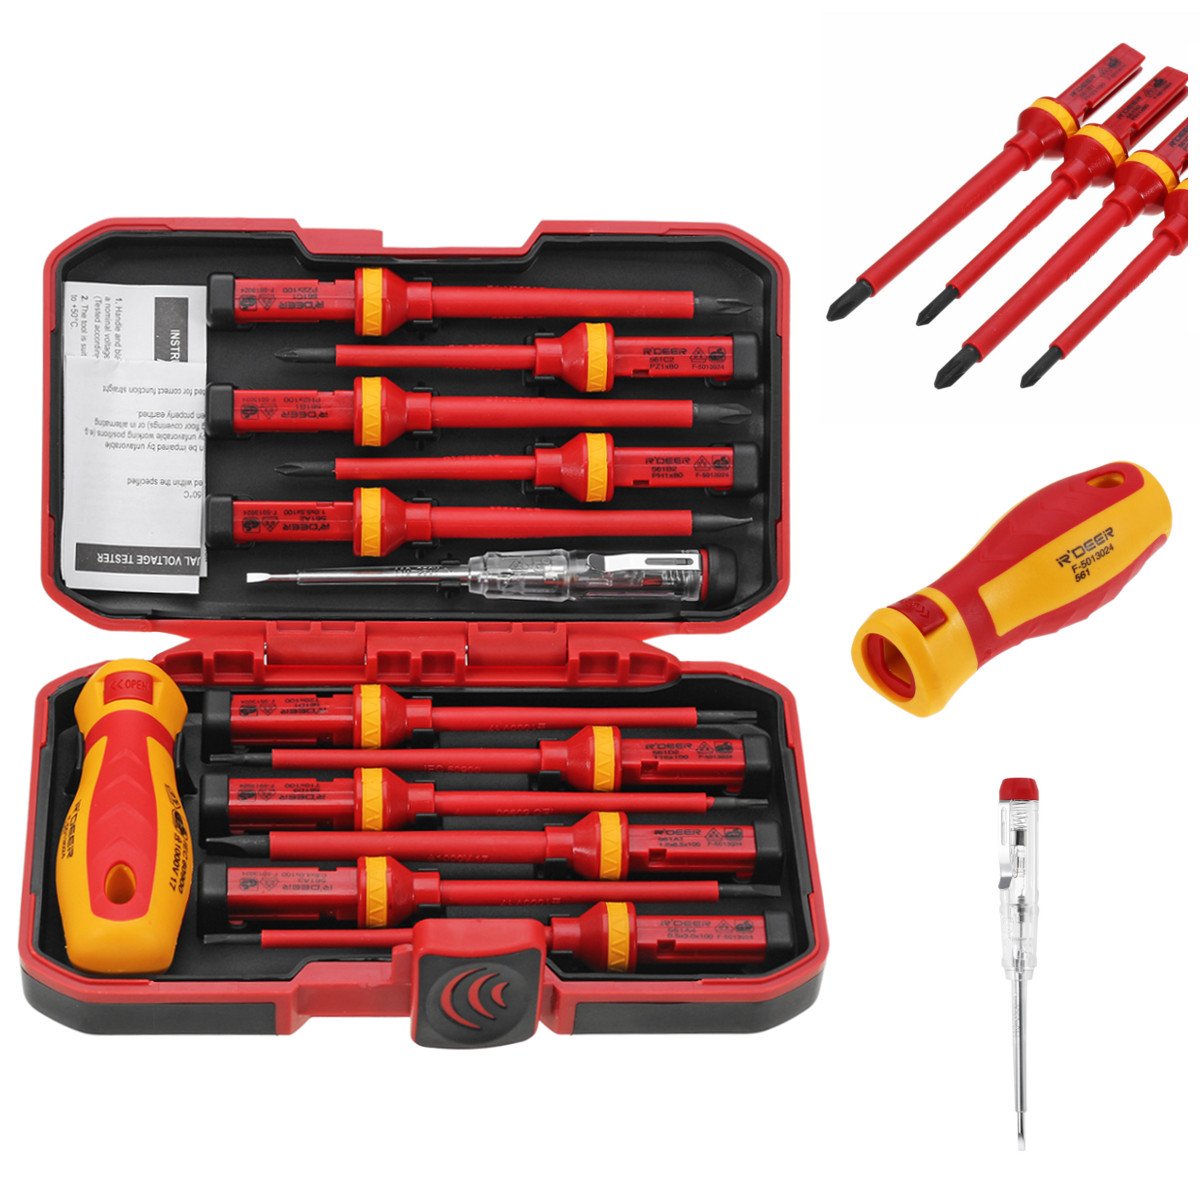 13Pcs 1000V Electronic Insulated Screwdriver Set Phillips Slotted Torx CR-V Screwdriver Repair Tools 2